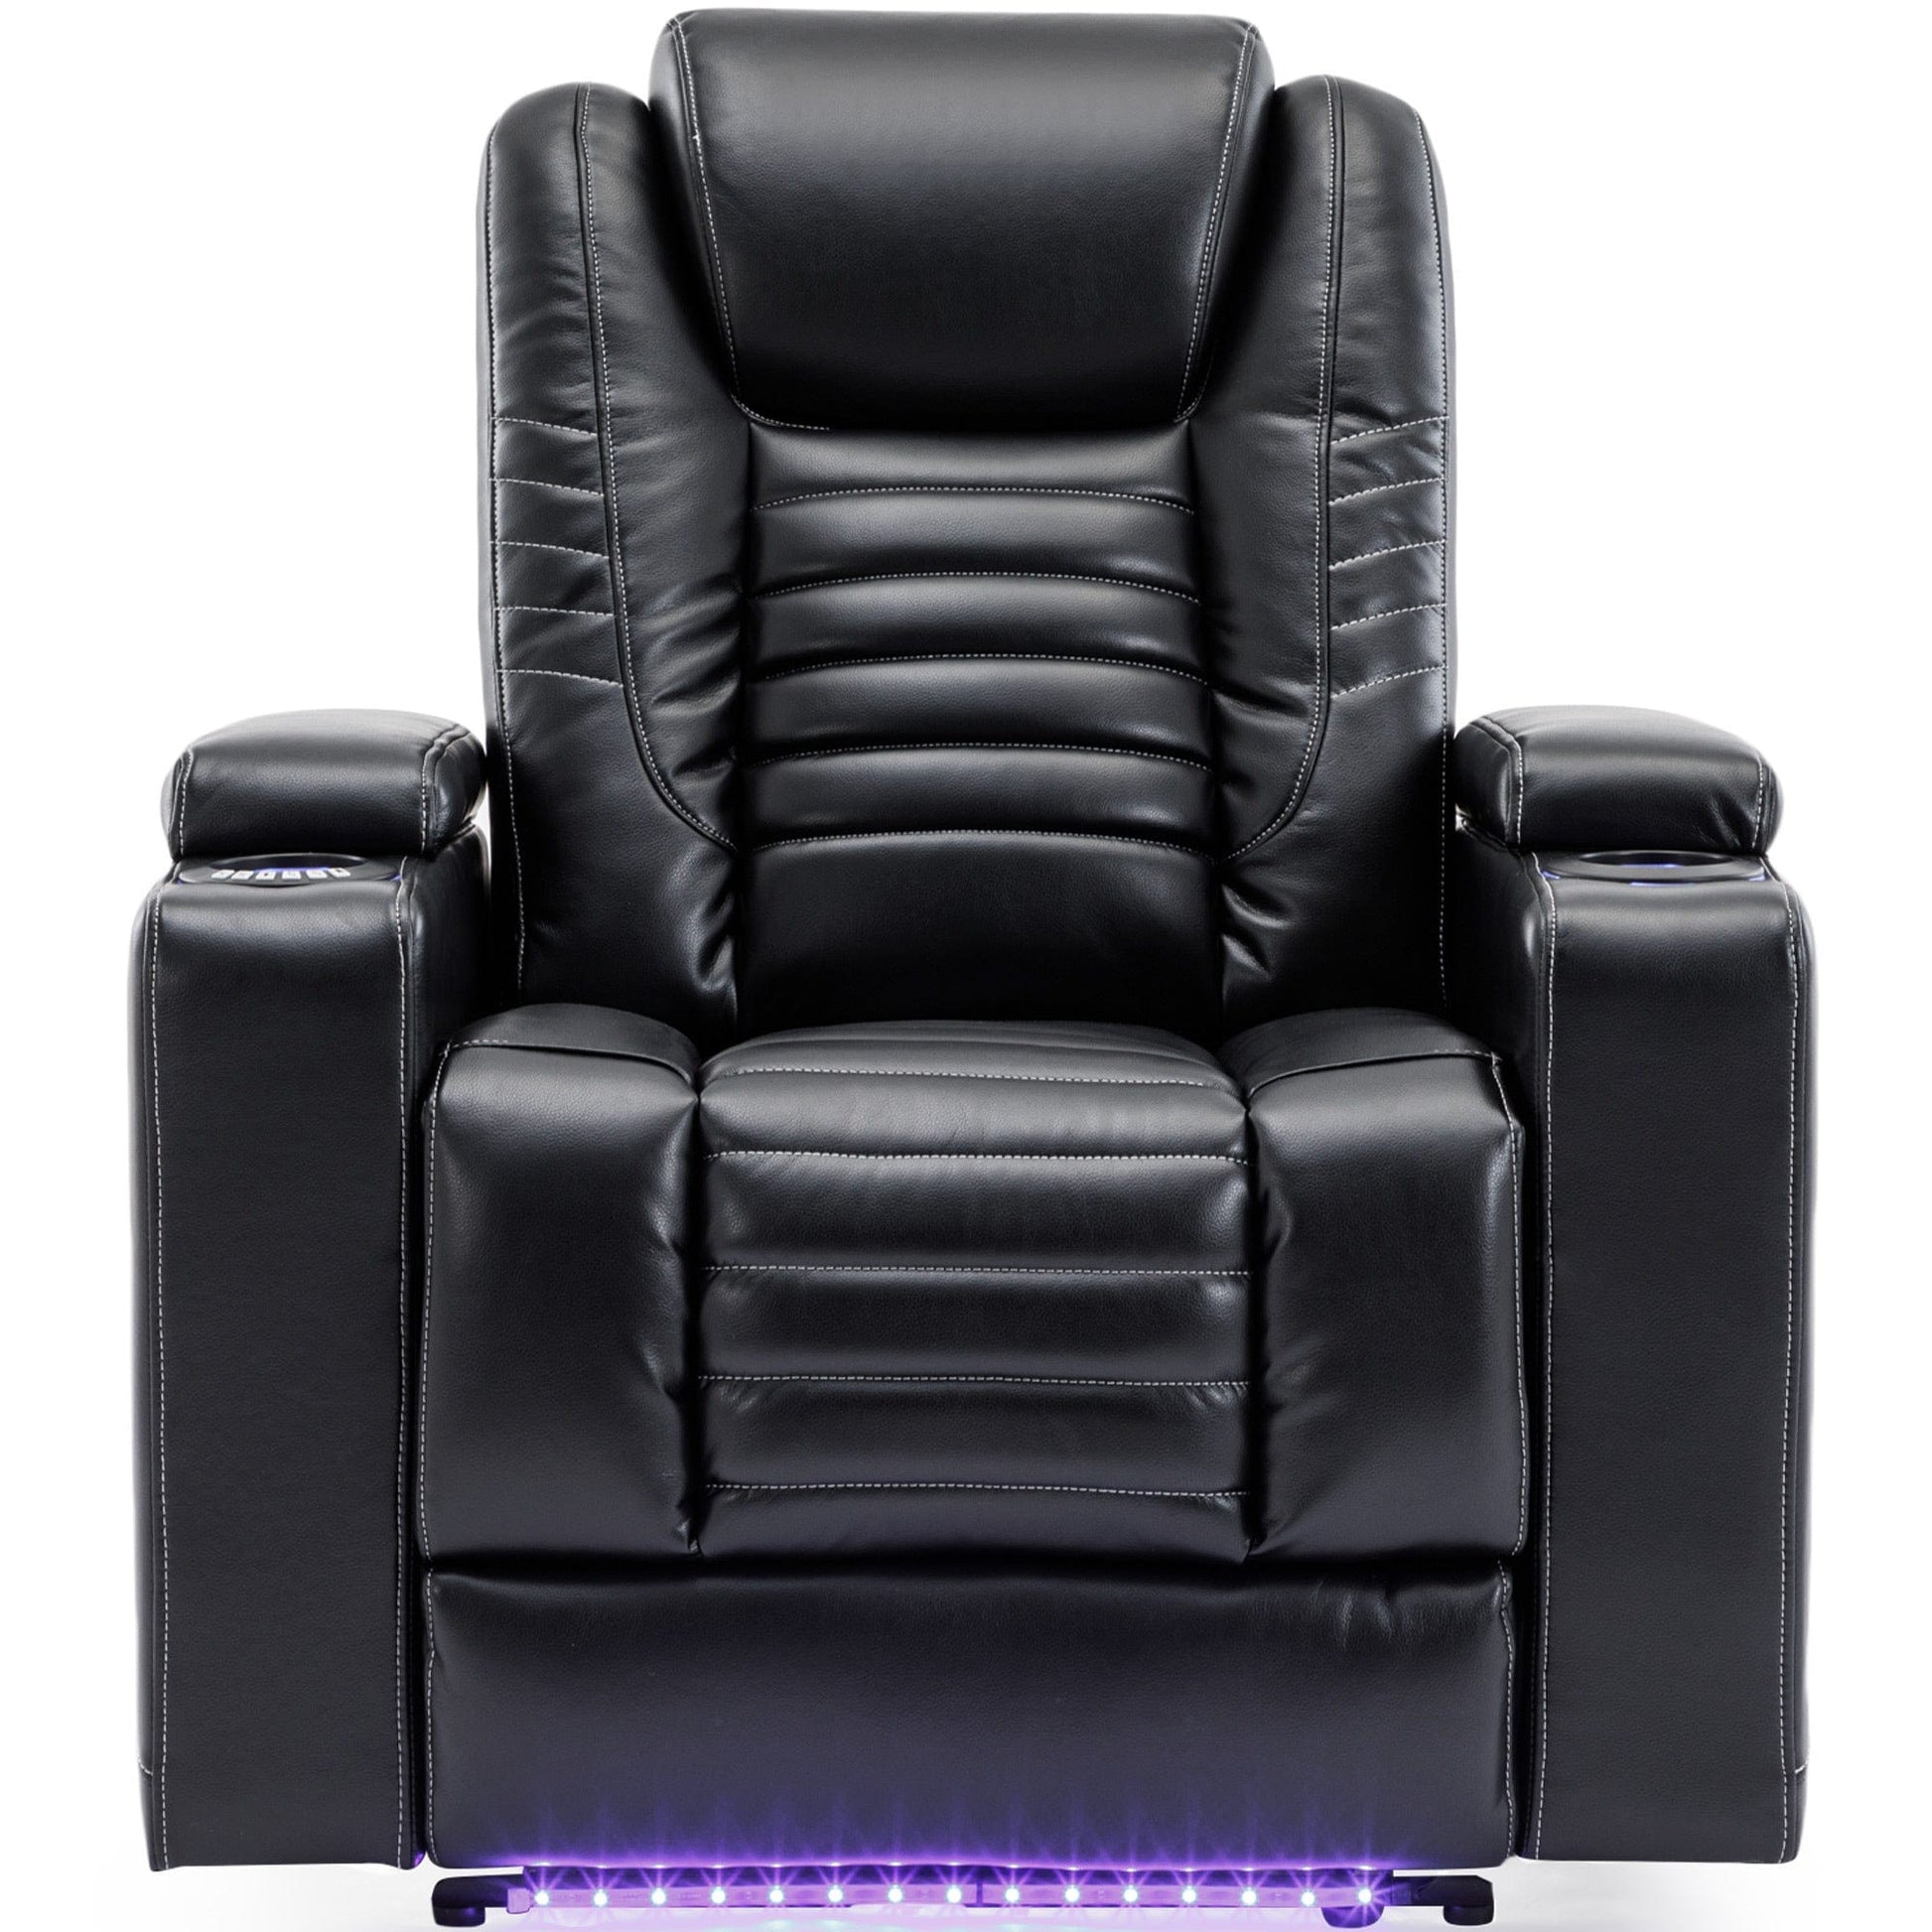 1st Choice Furniture Direct Recliner Chair 1st Choice Home Theater Seating with Power Motion/ Adjustable Headrest